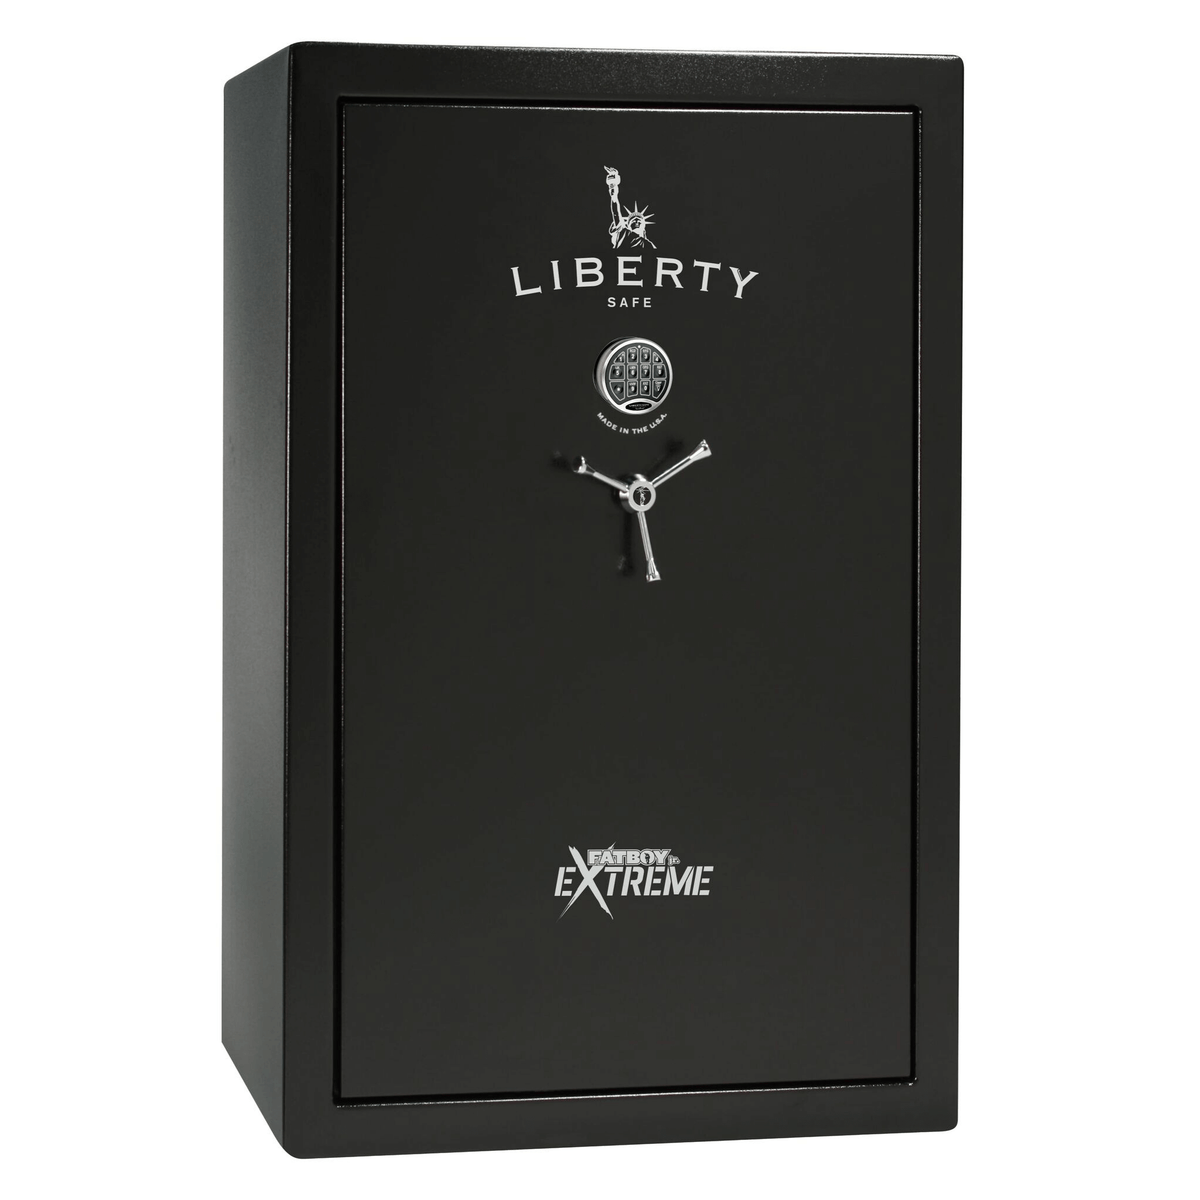 Fatboy Junior Extreme Safe in Textured Black with Chrome Electronic Lock.